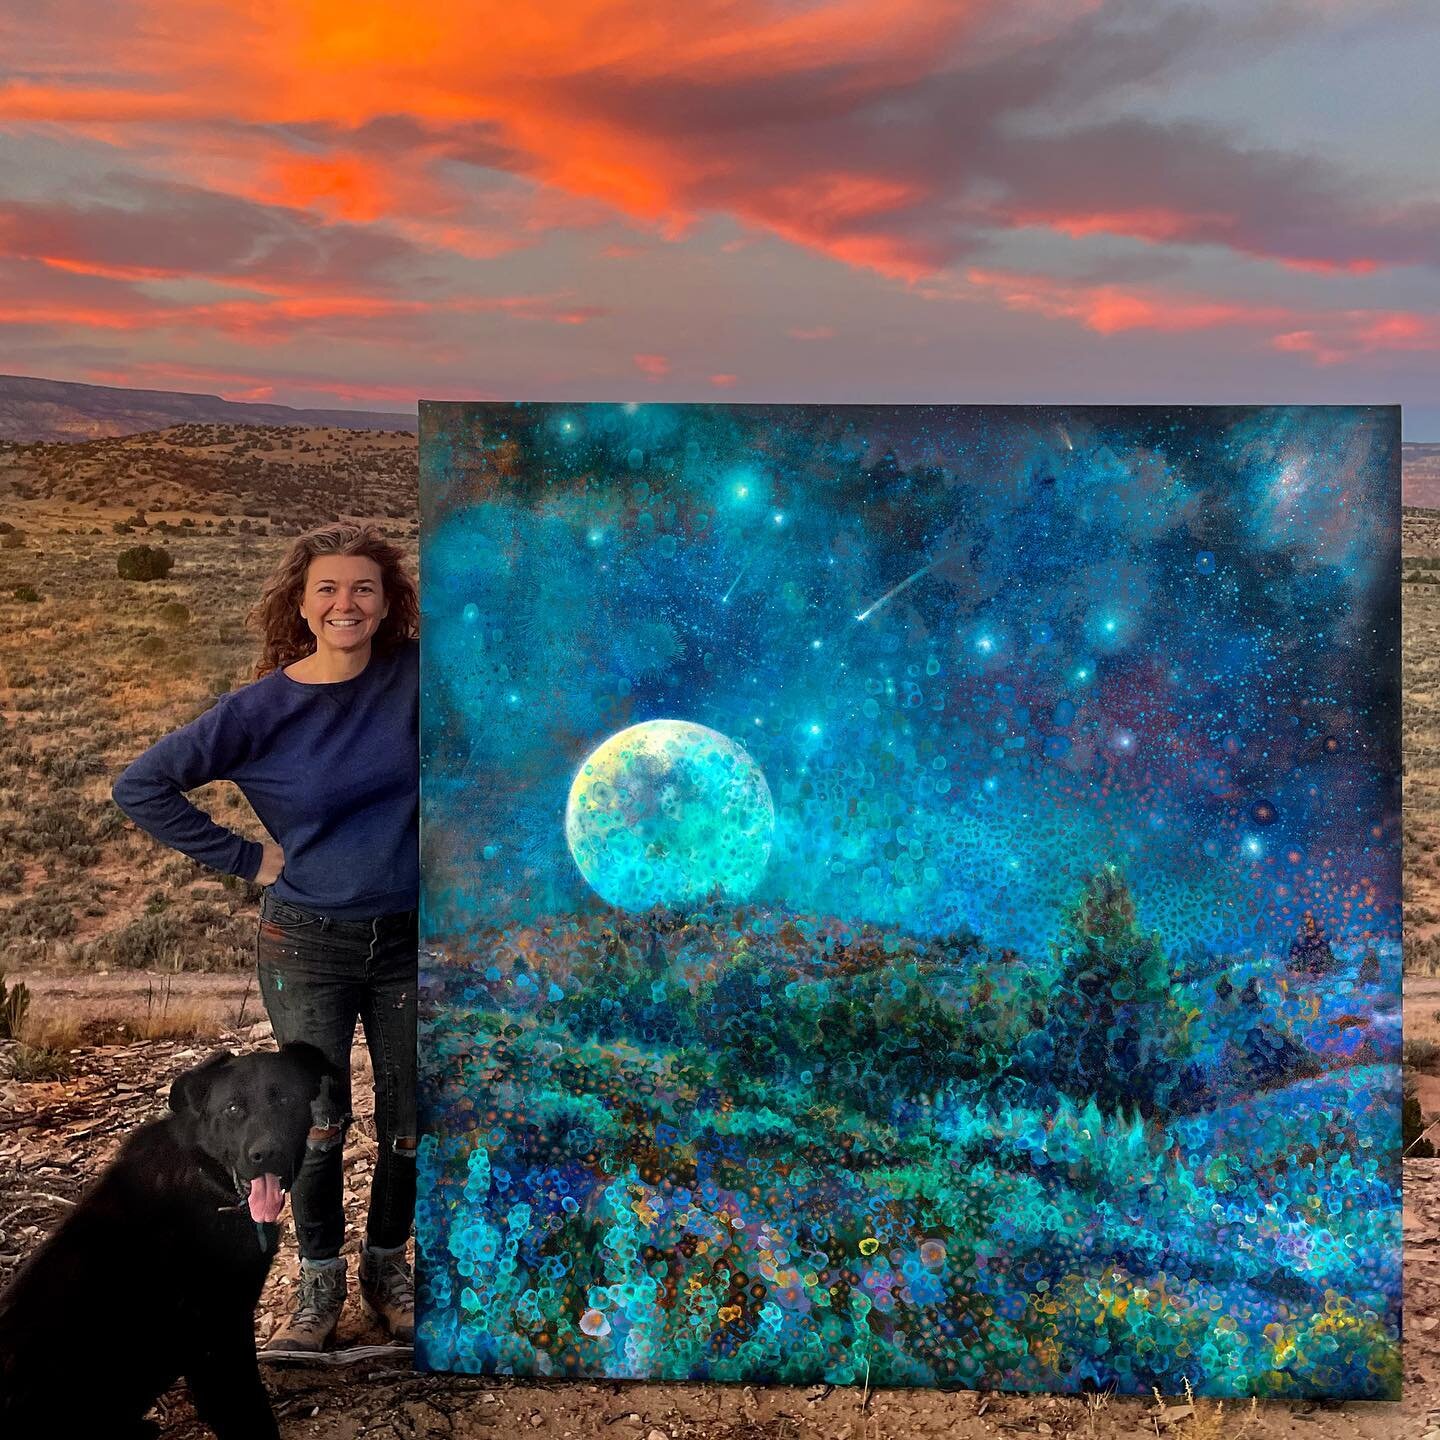 NEW!  72x72in &ldquo;New Mexico Moonrise&rdquo; oil on canvas. Original available. Accepting commissions.

Very pleased to finally share this new painting with you. Using my shop #aircompressor to blow into wet #holbeinoils - just mesmerized by the c